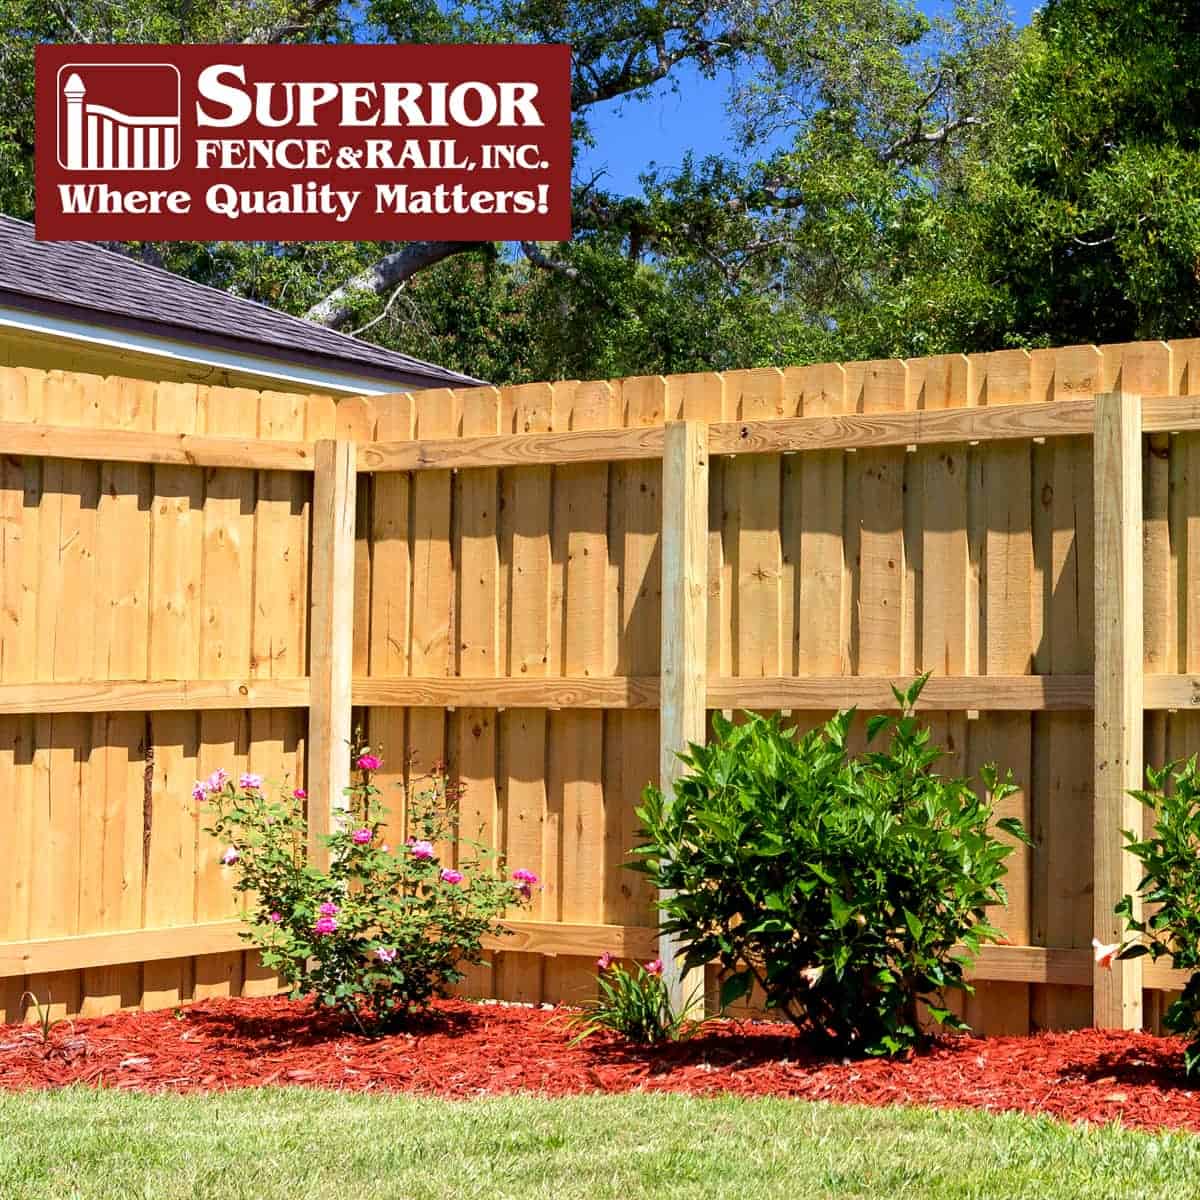 https://www.superiorfenceandrail.com/wp-content/uploads/2022/05/Charleston-Fence-Company-Contractory.jpg